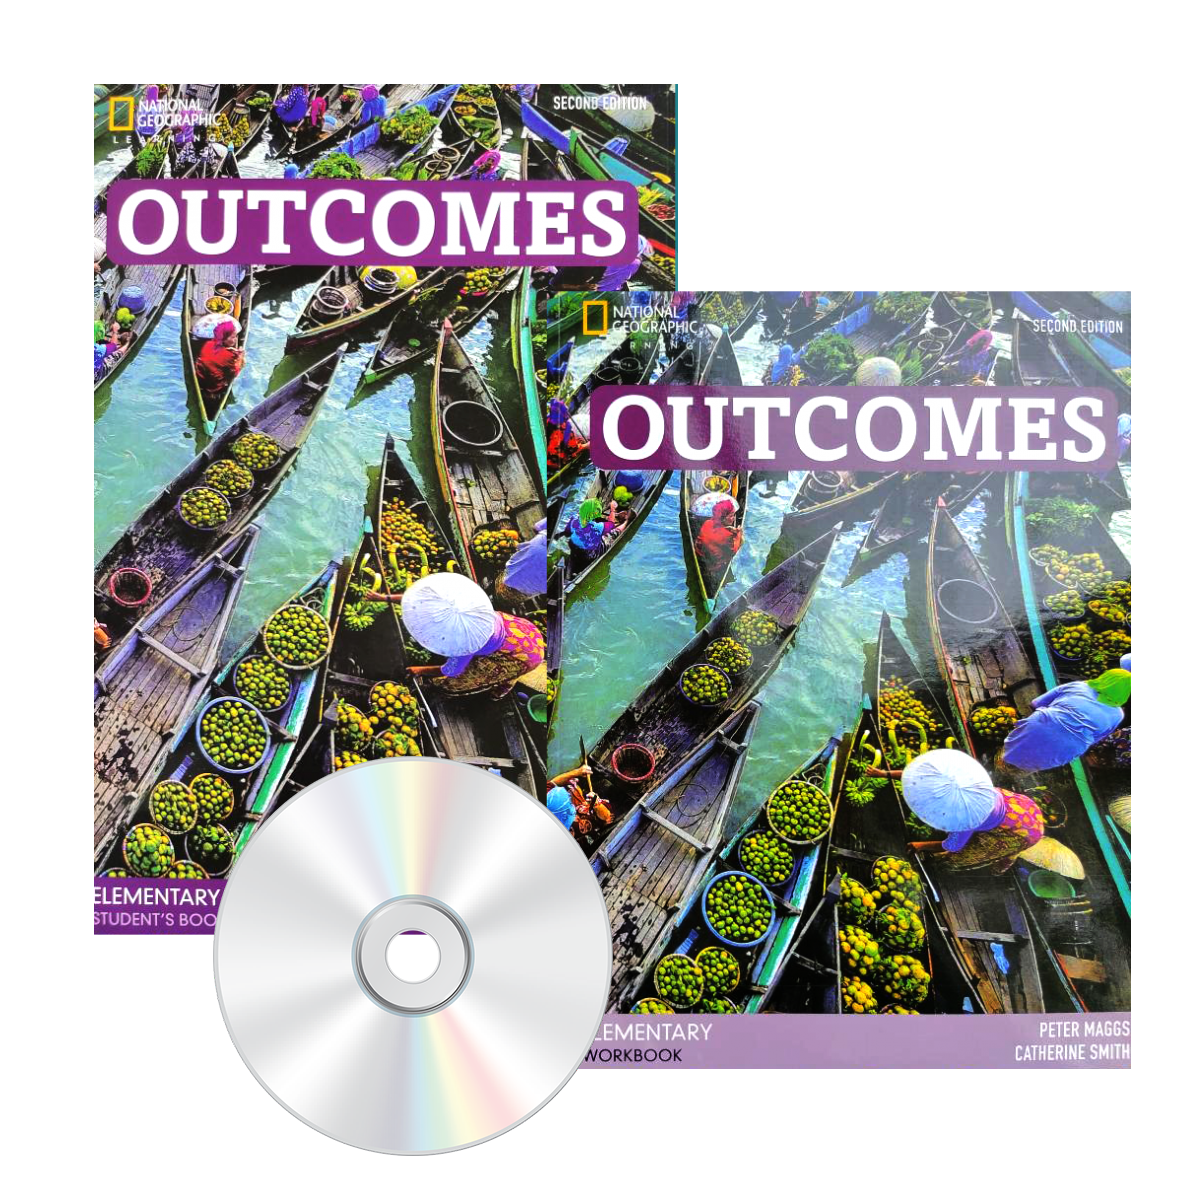 Outcomes elementary students book. Outcomes Elementary. Outcomes Elementary student's book. Outcomes Elementary 1st Edition. Outcomes Elementary student's book ответы.